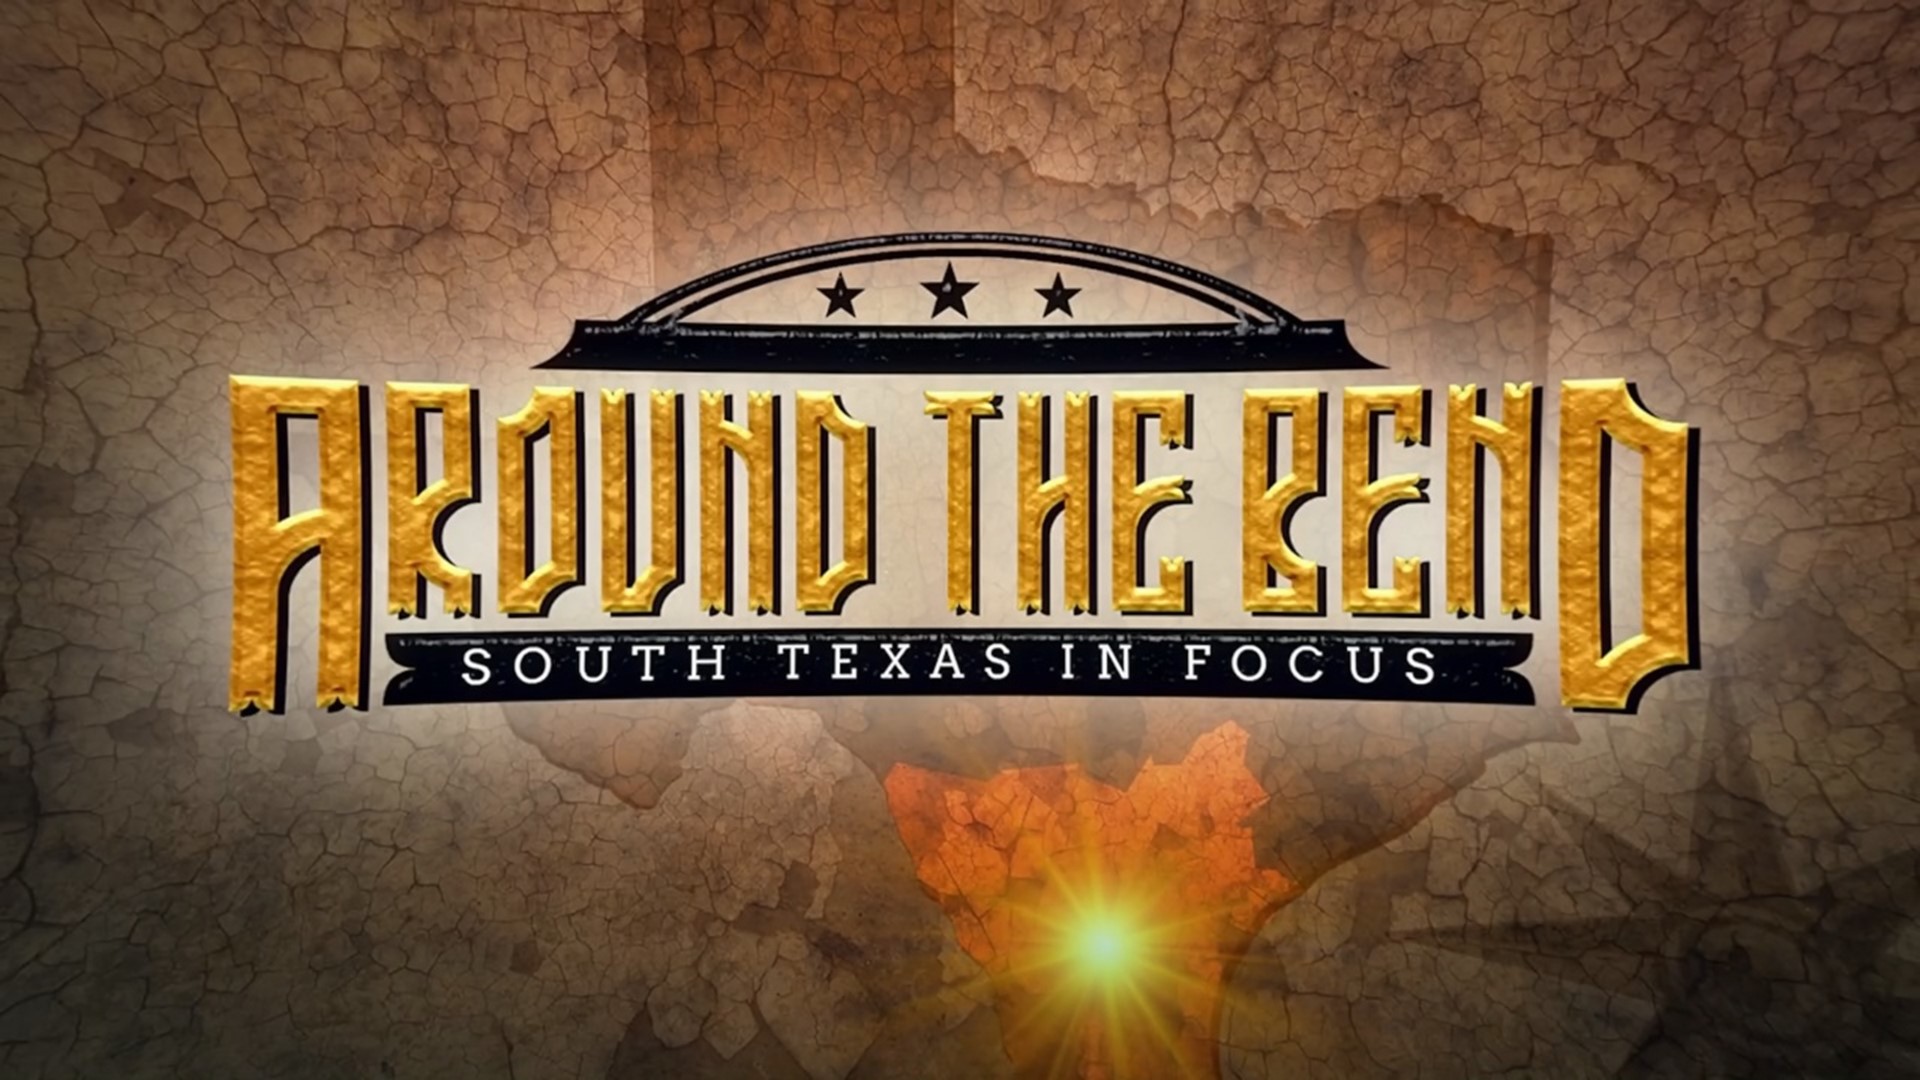 Around the Bend is a weekly sponsored segment featuring businesses in the Coastal Bend.